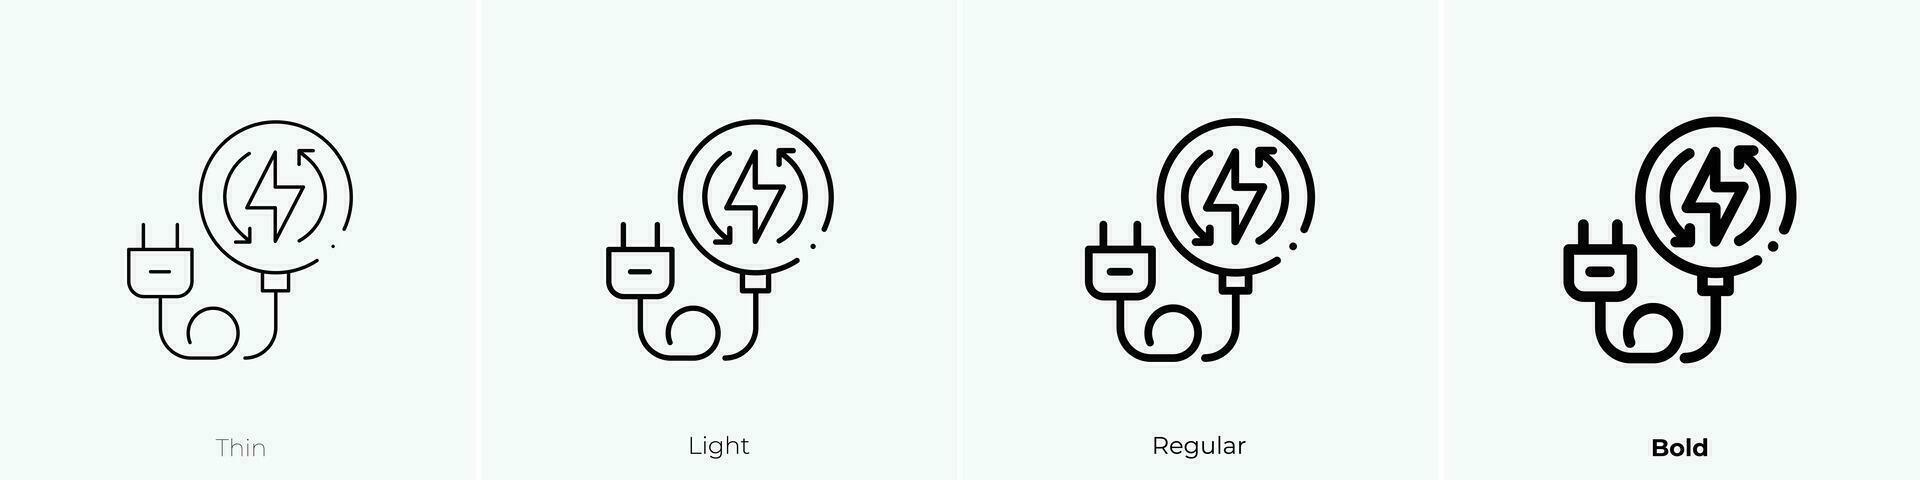 rechargeable icon. Thin, Light, Regular And Bold style design isolated on white background vector